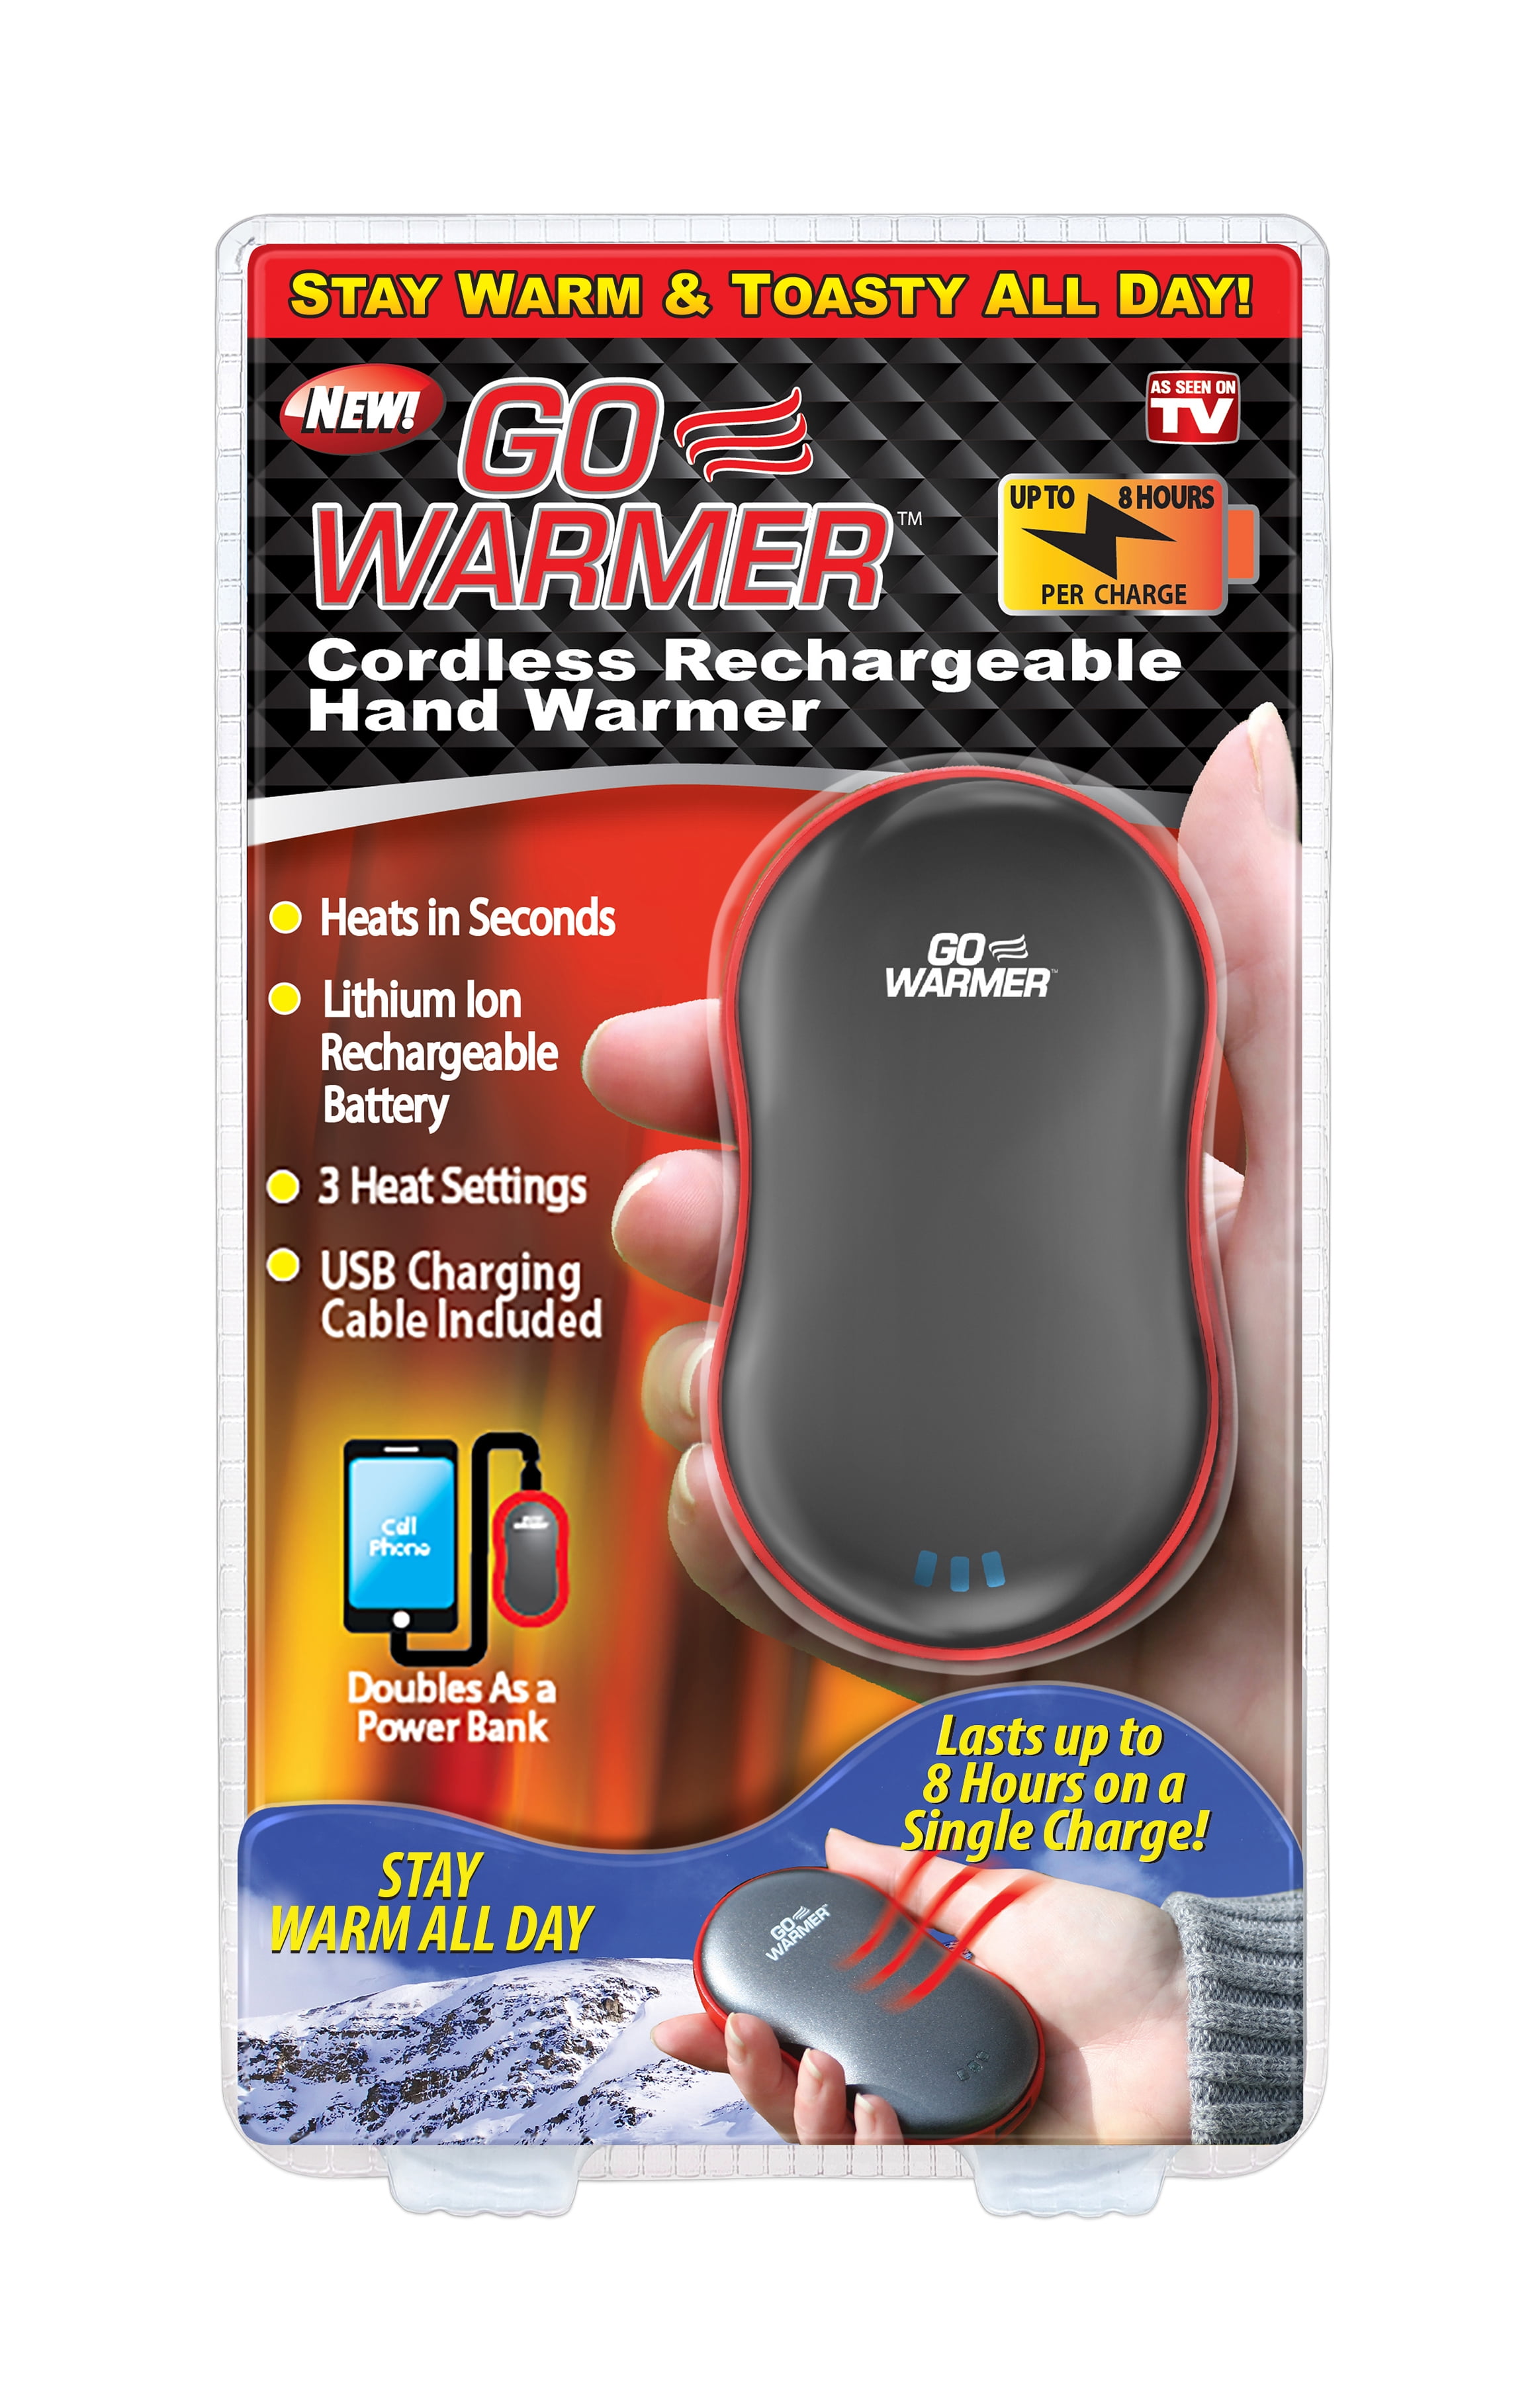 Quick Look at the Go Warmer Cordless Rechargeable Hand Heater 